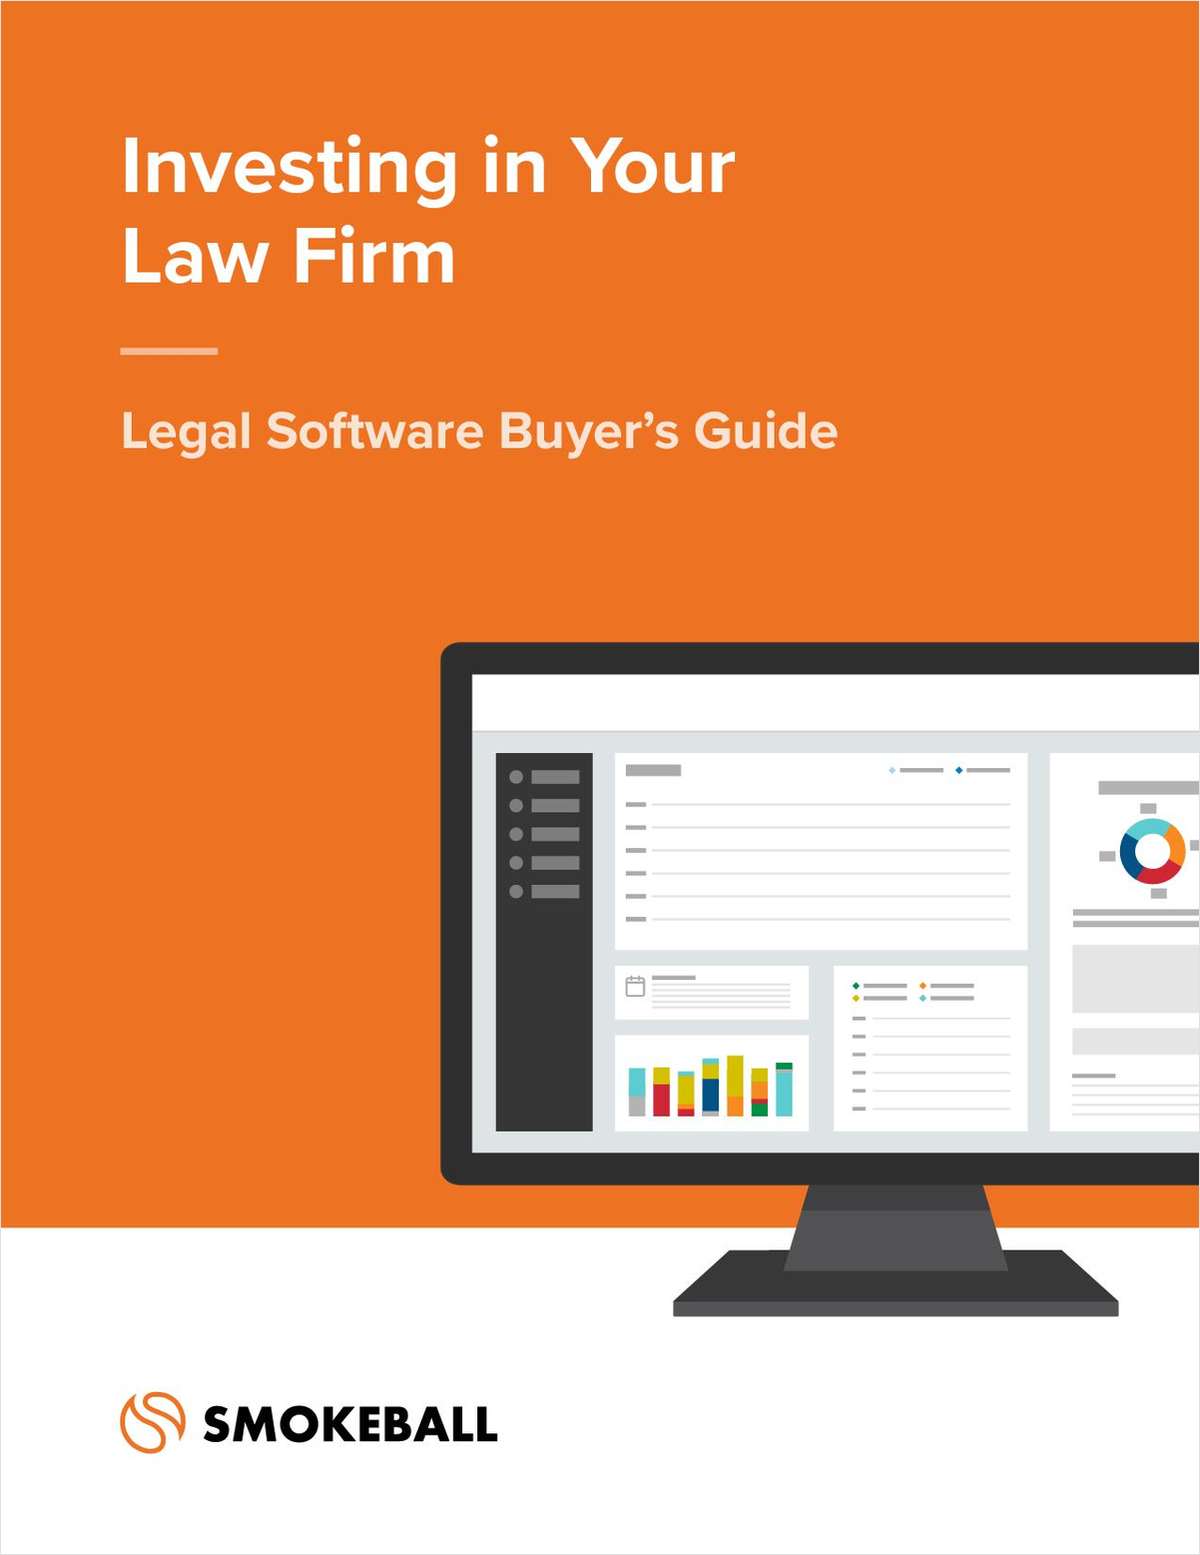 To invest in your law firm is to change how your firm succeeds as a business. This brief guide provides an outline for developing a quick and clear picture of what your firm needs to improve business processes and invest in your future.